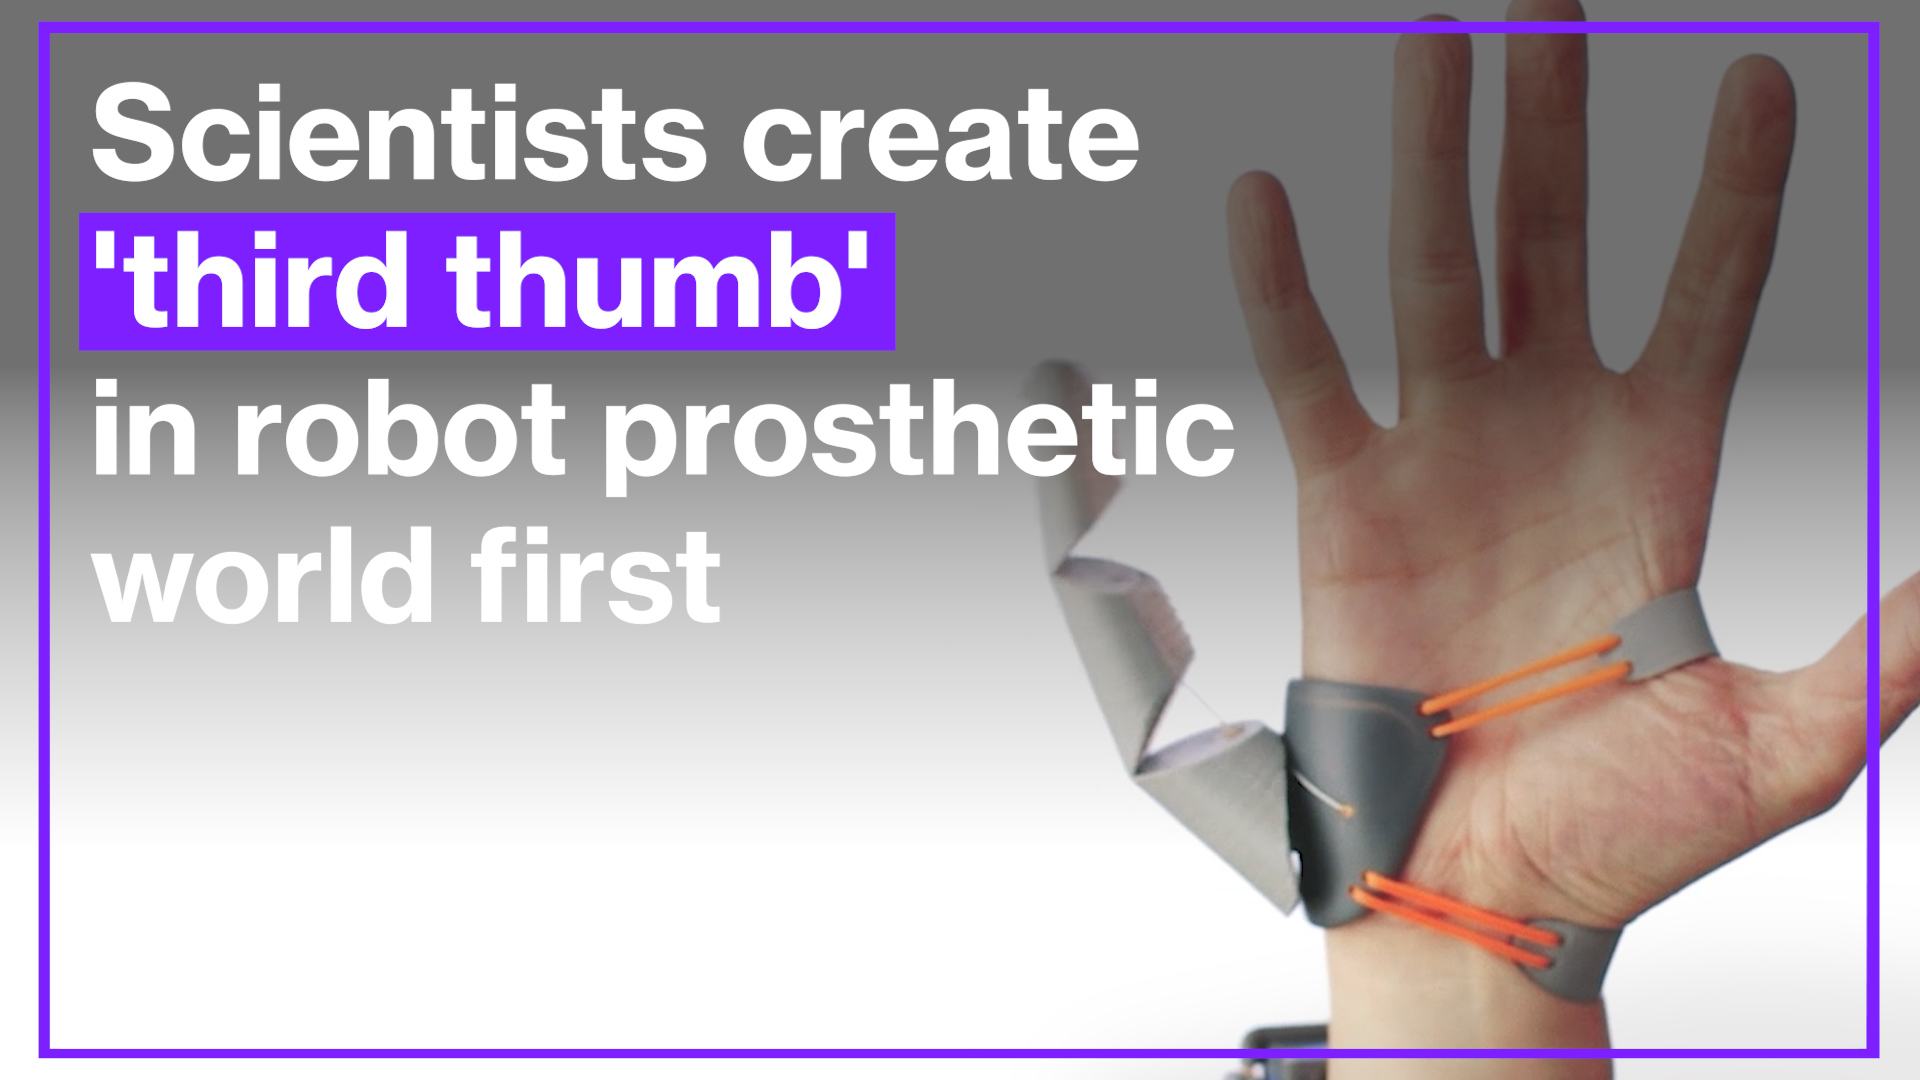 Scientists create 'third thumb' in robot prosthetic world first